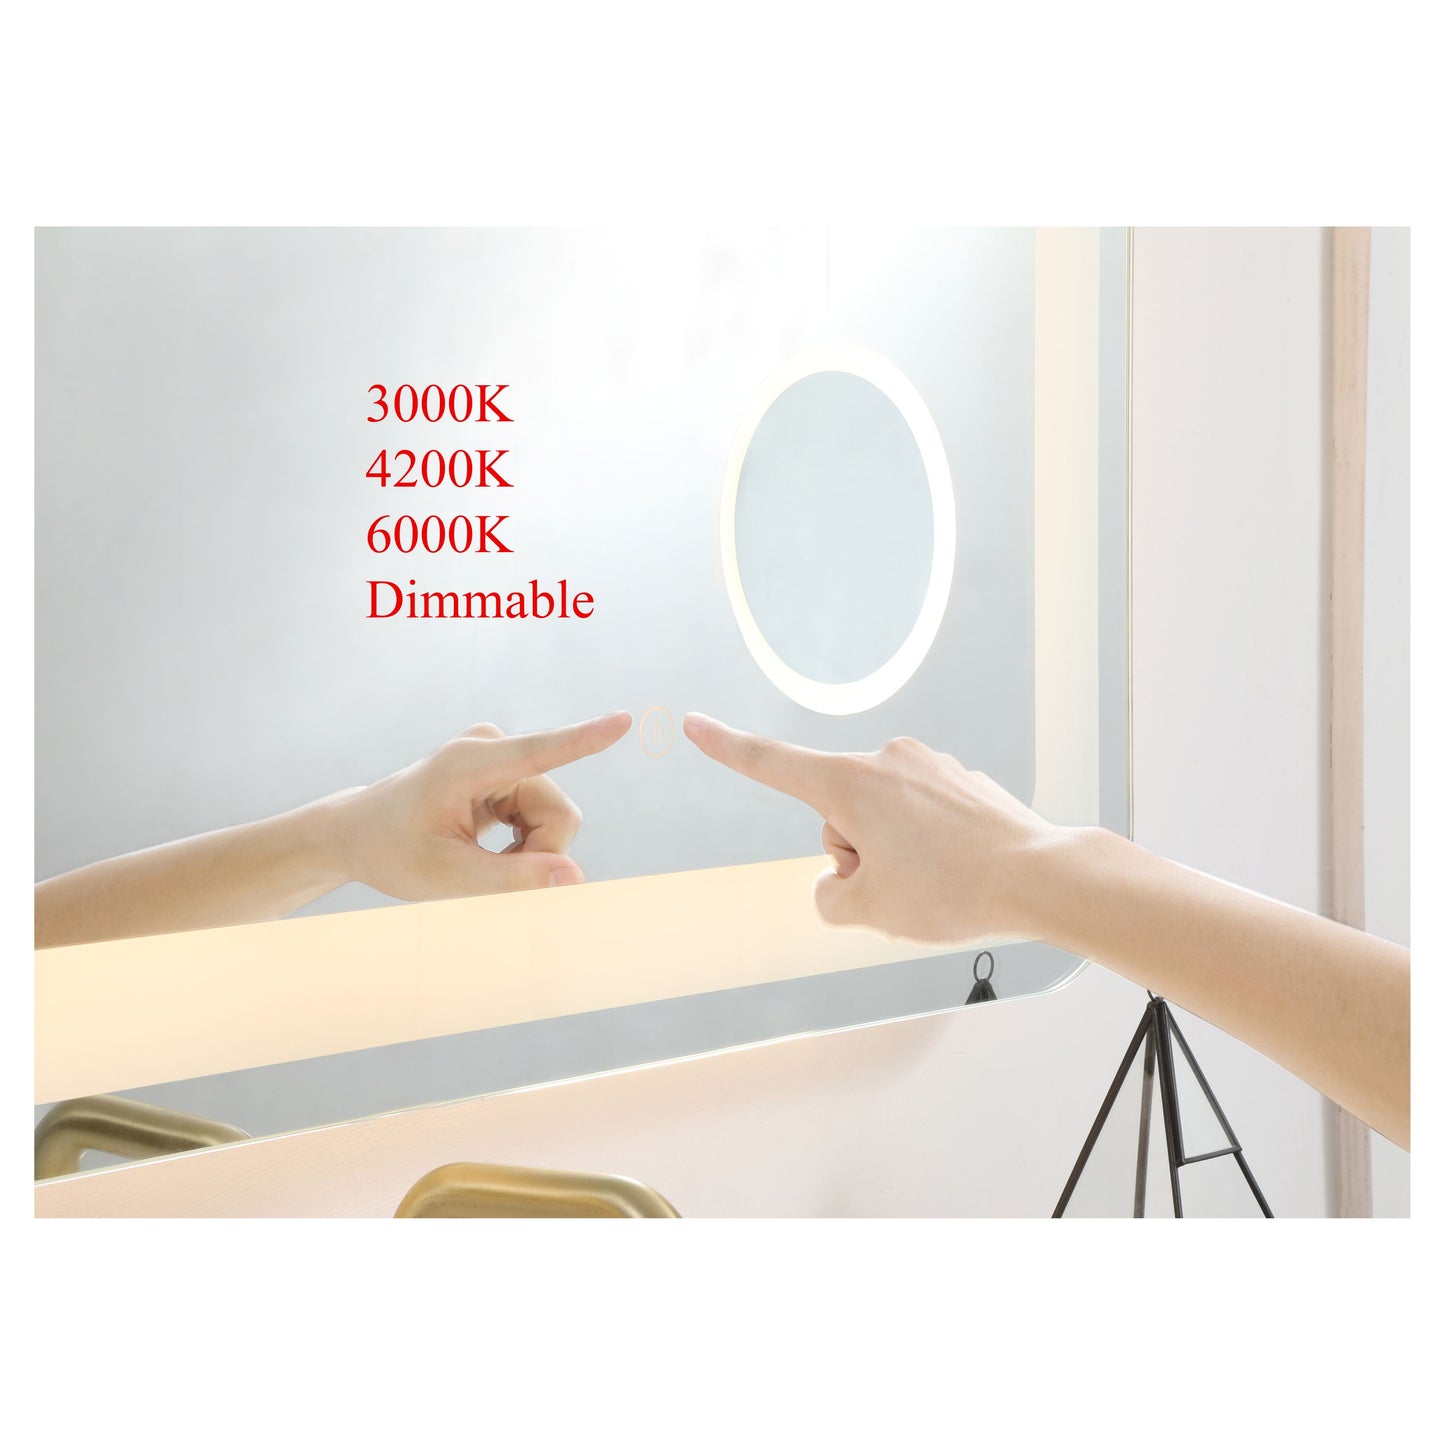 MRE52730 Lux 30" x 27" LED Mirror in Glossy White - Adjustable Color Temp